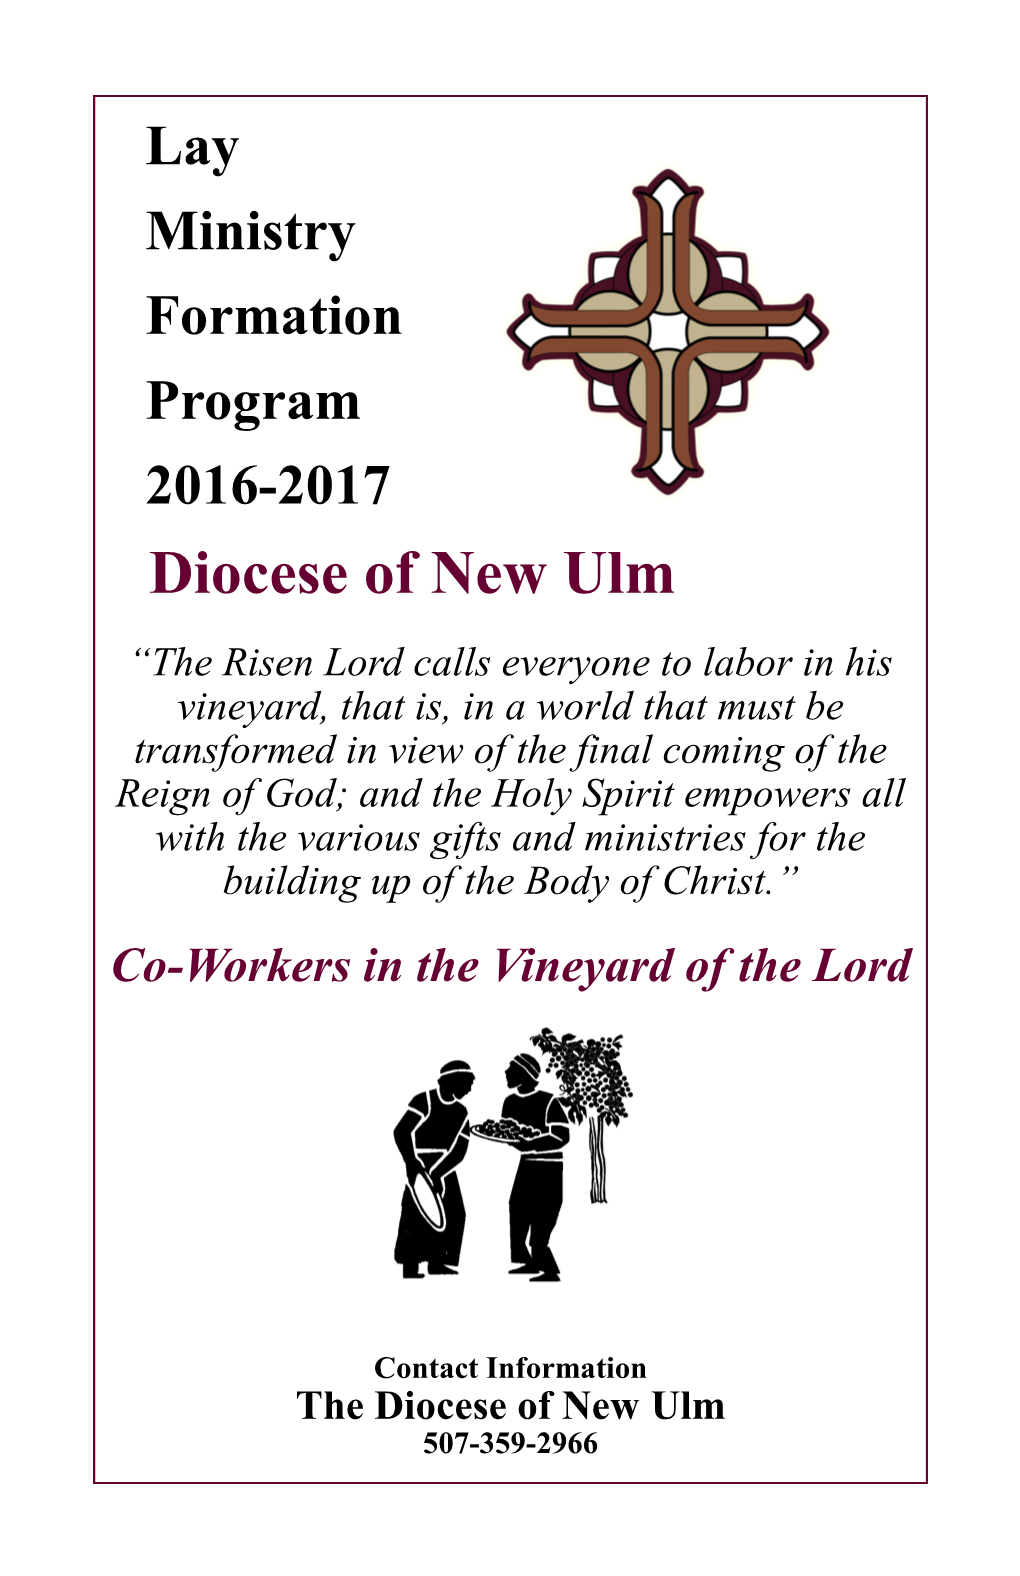 Lay Ministry Formation Program 2016-2017 Diocese of New Ulm